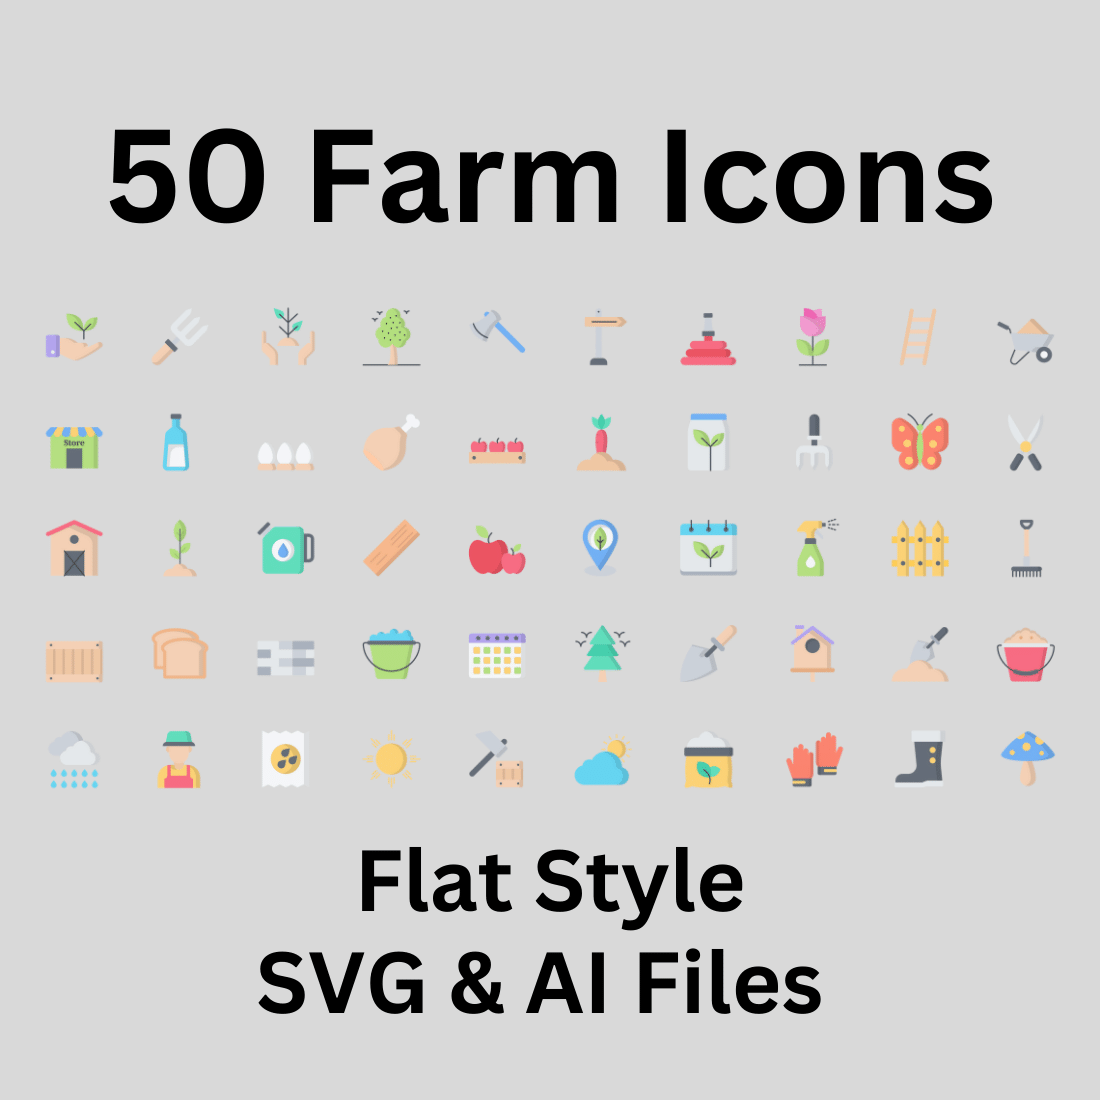 Farm Icon Set 50 Flat Icons - SVG And AI Files preview image.